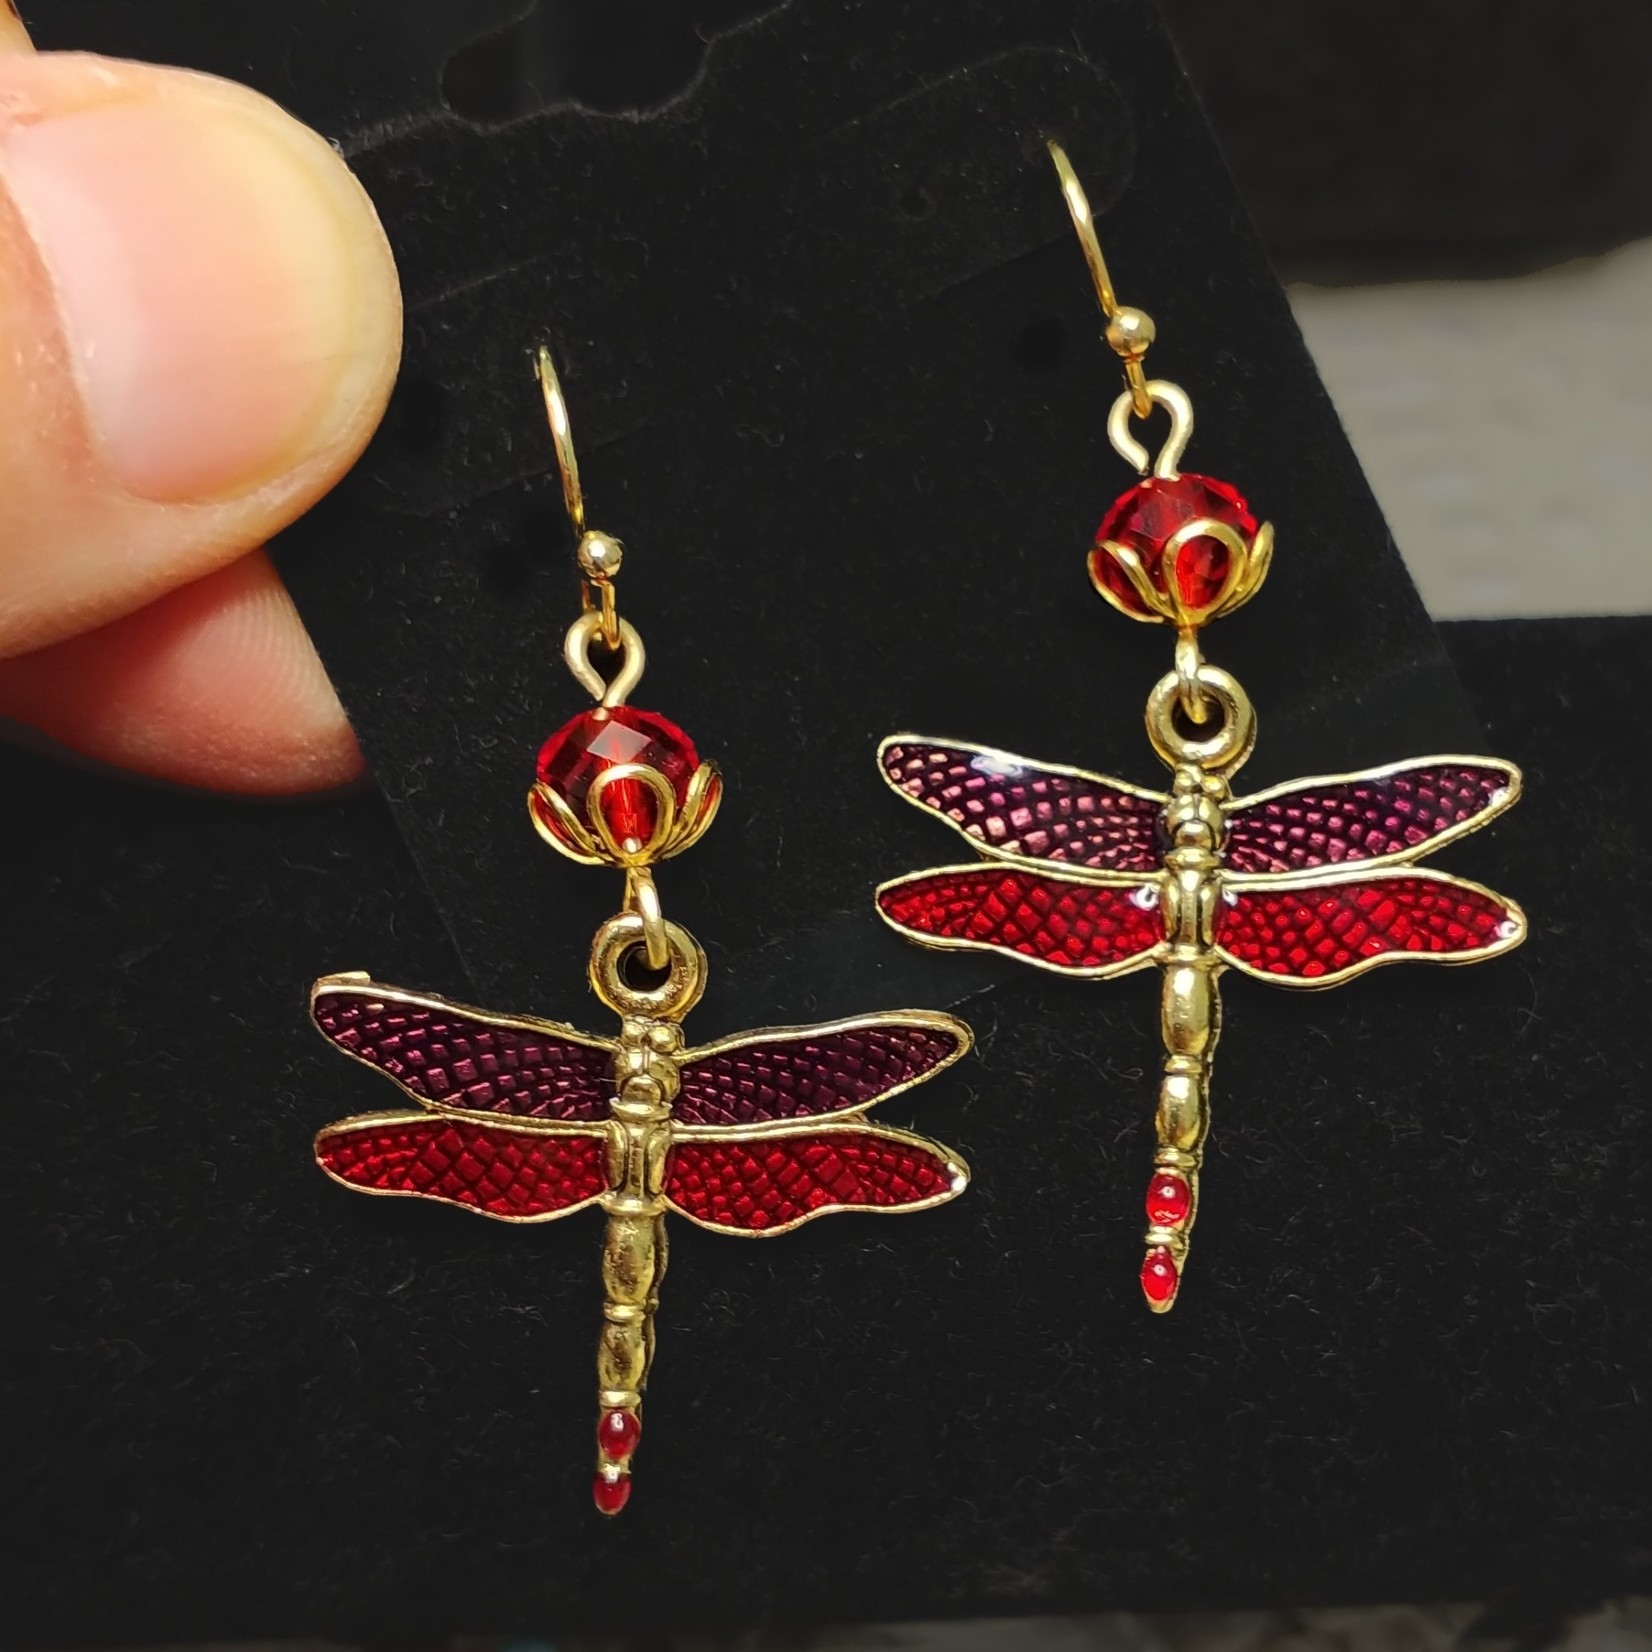 Vibrant Red Dragonfly Earrings - Ready to Wear